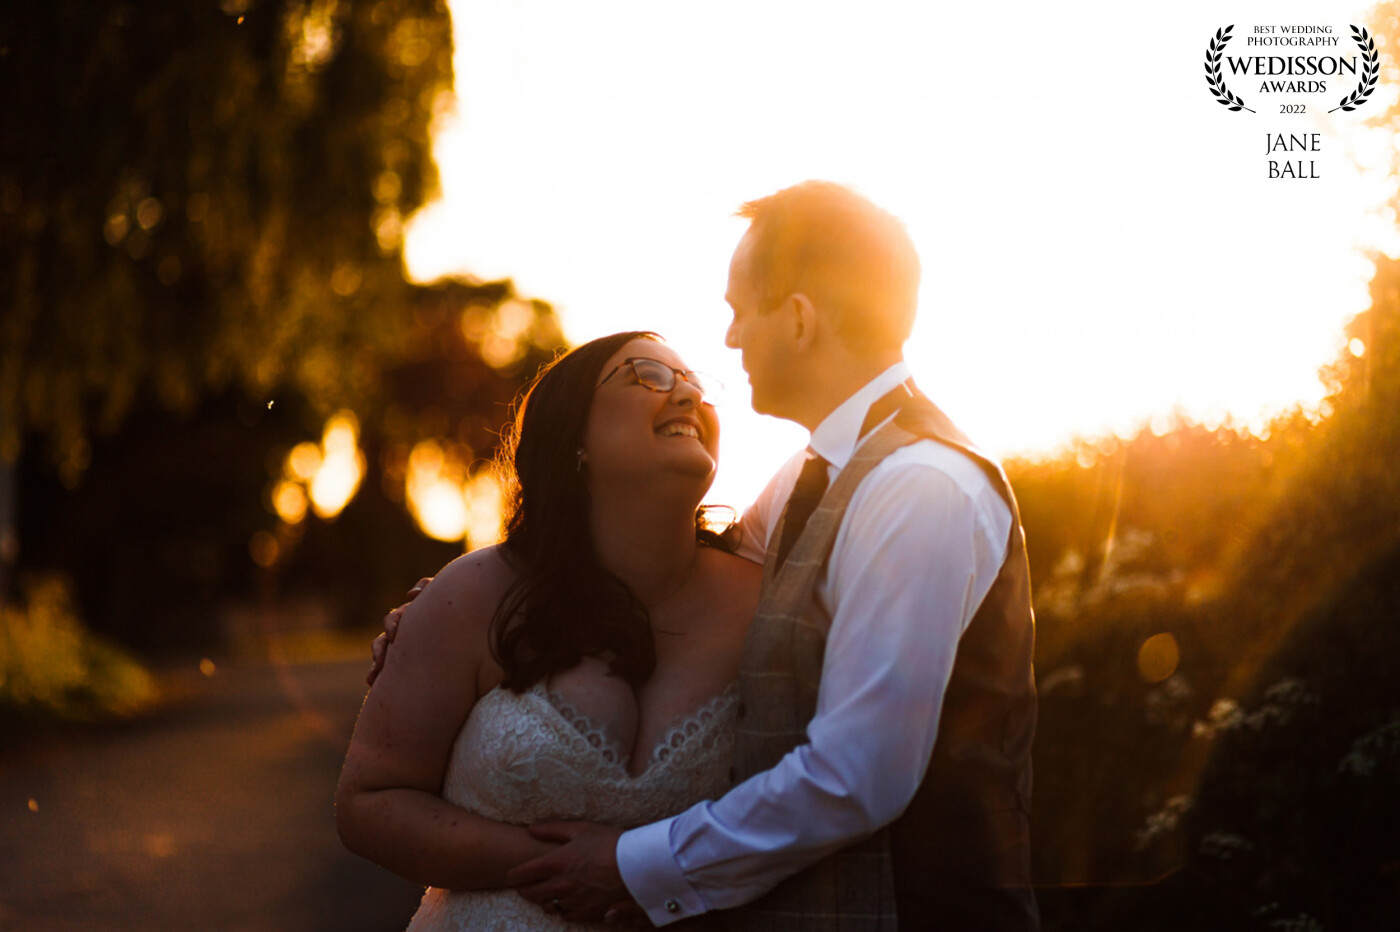 This is probably one of the best sunsets I've experienced as a wedding photographer. As soon as I saw the lane outside the venue I knew I had to get my couple out and into that beautiful warm light for their portraits. They were such a great fun loving couple we were out for ages and I got absolutely loads of gorgeous portraits of them just being them, enjoying some quiet time away from the crowd.